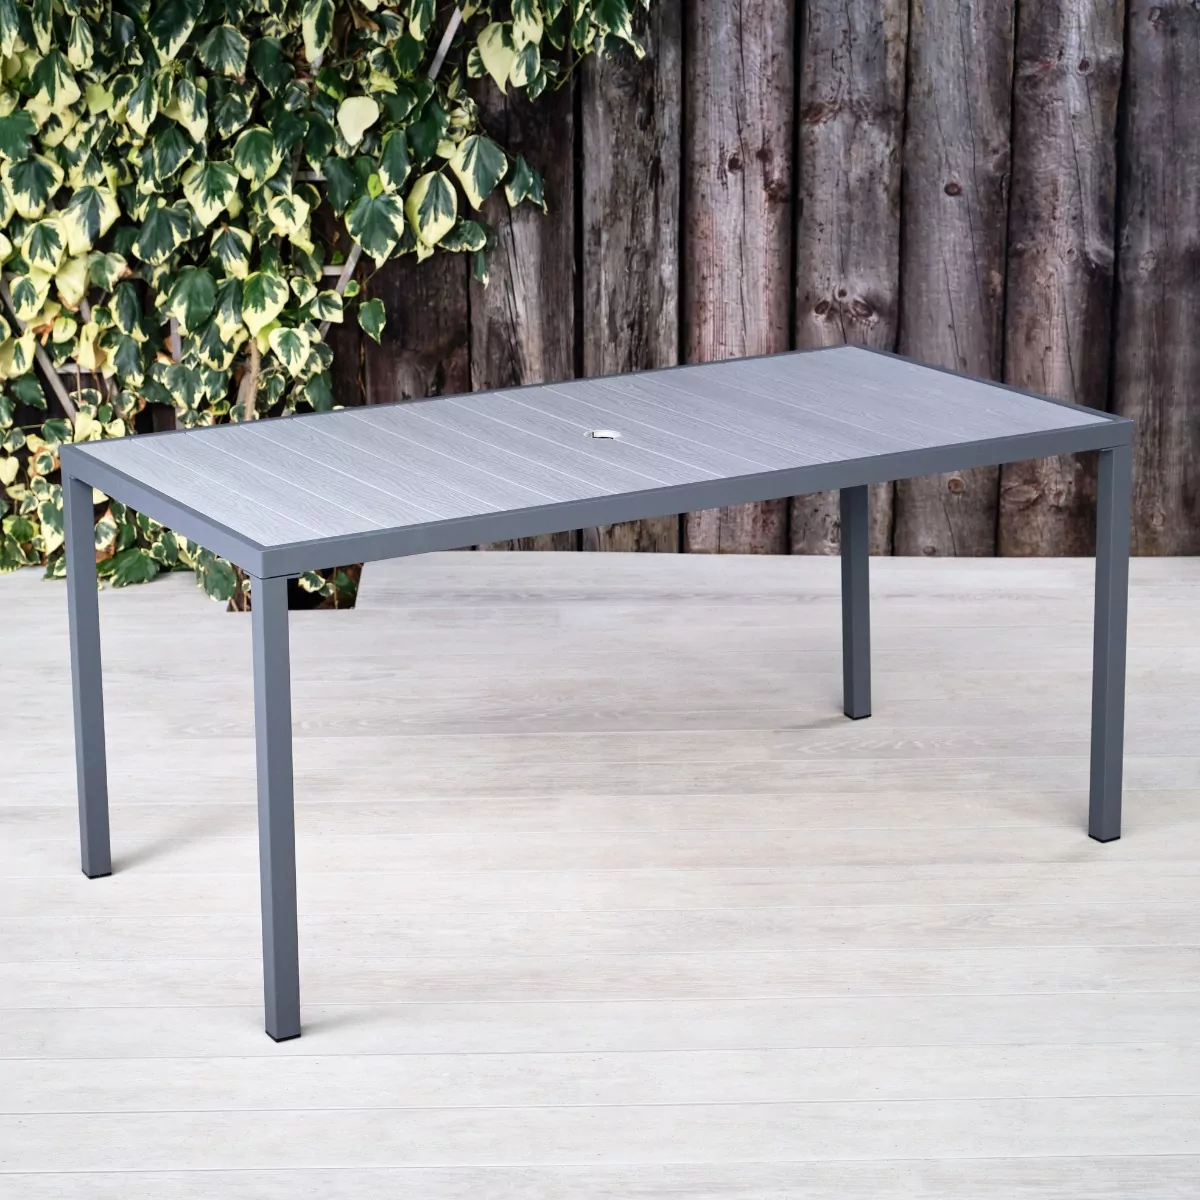 Mortimer Rectangular Texture Wood Effect Plastic in Grey Table